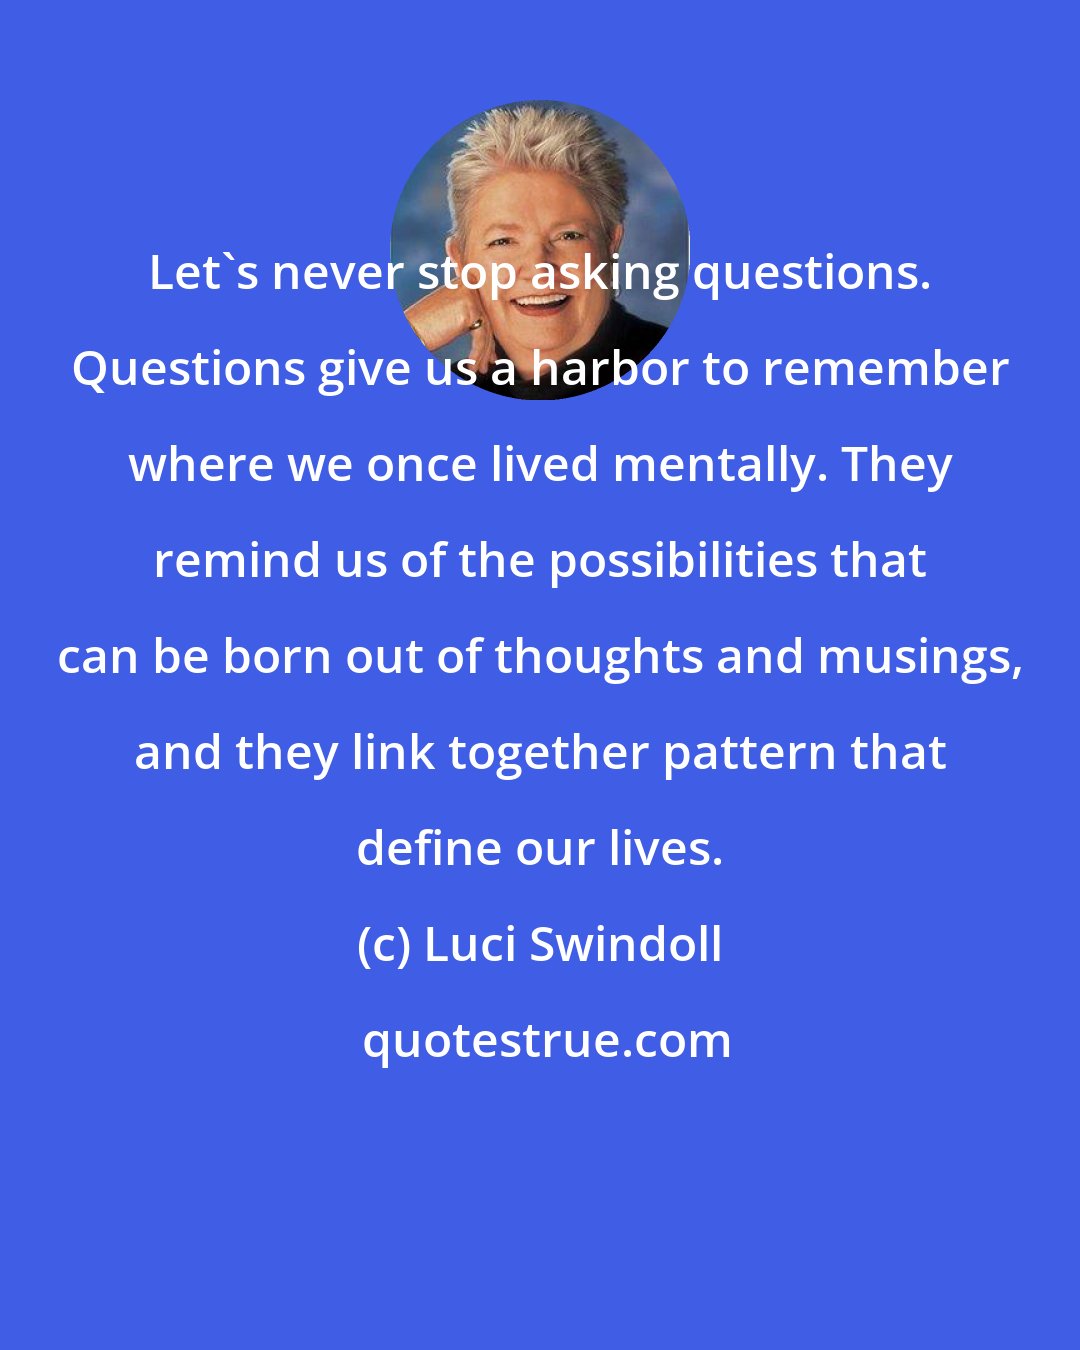 Luci Swindoll: Let's never stop asking questions. Questions give us a harbor to remember where we once lived mentally. They remind us of the possibilities that can be born out of thoughts and musings, and they link together pattern that define our lives.